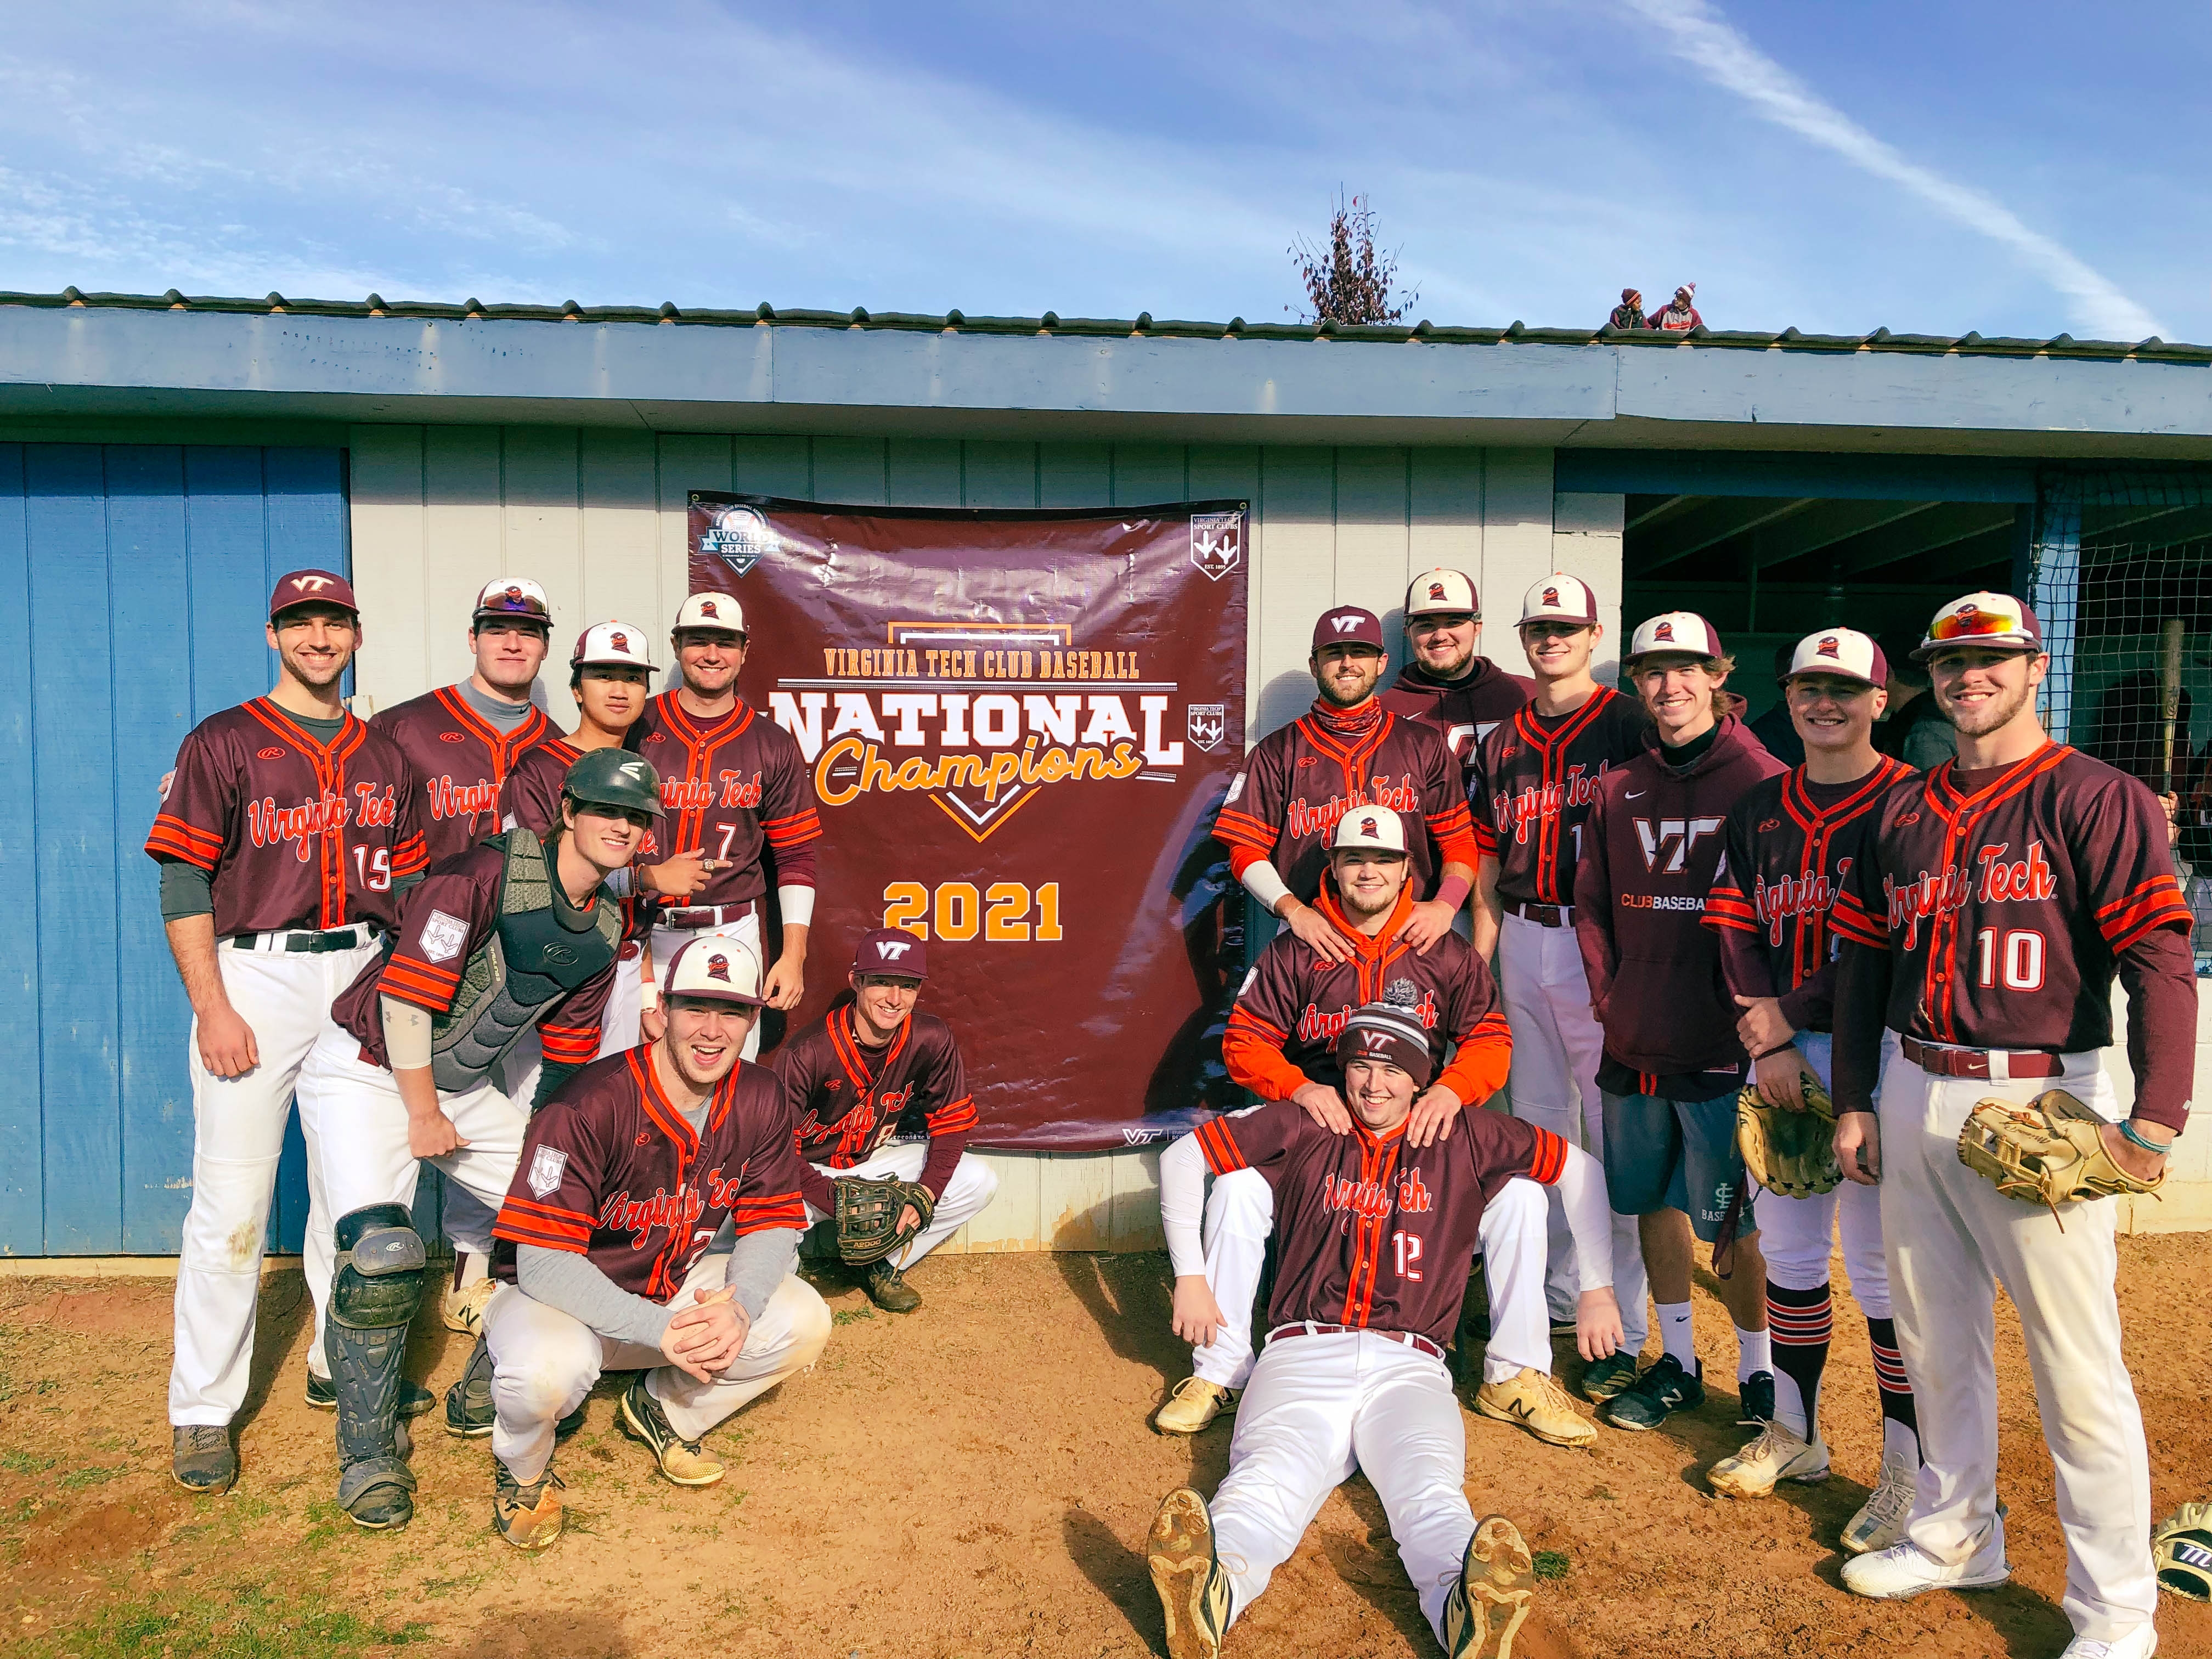 The Virginia Tech Club Baseball team stands together on the baseball field, posing with their national champions trophy.